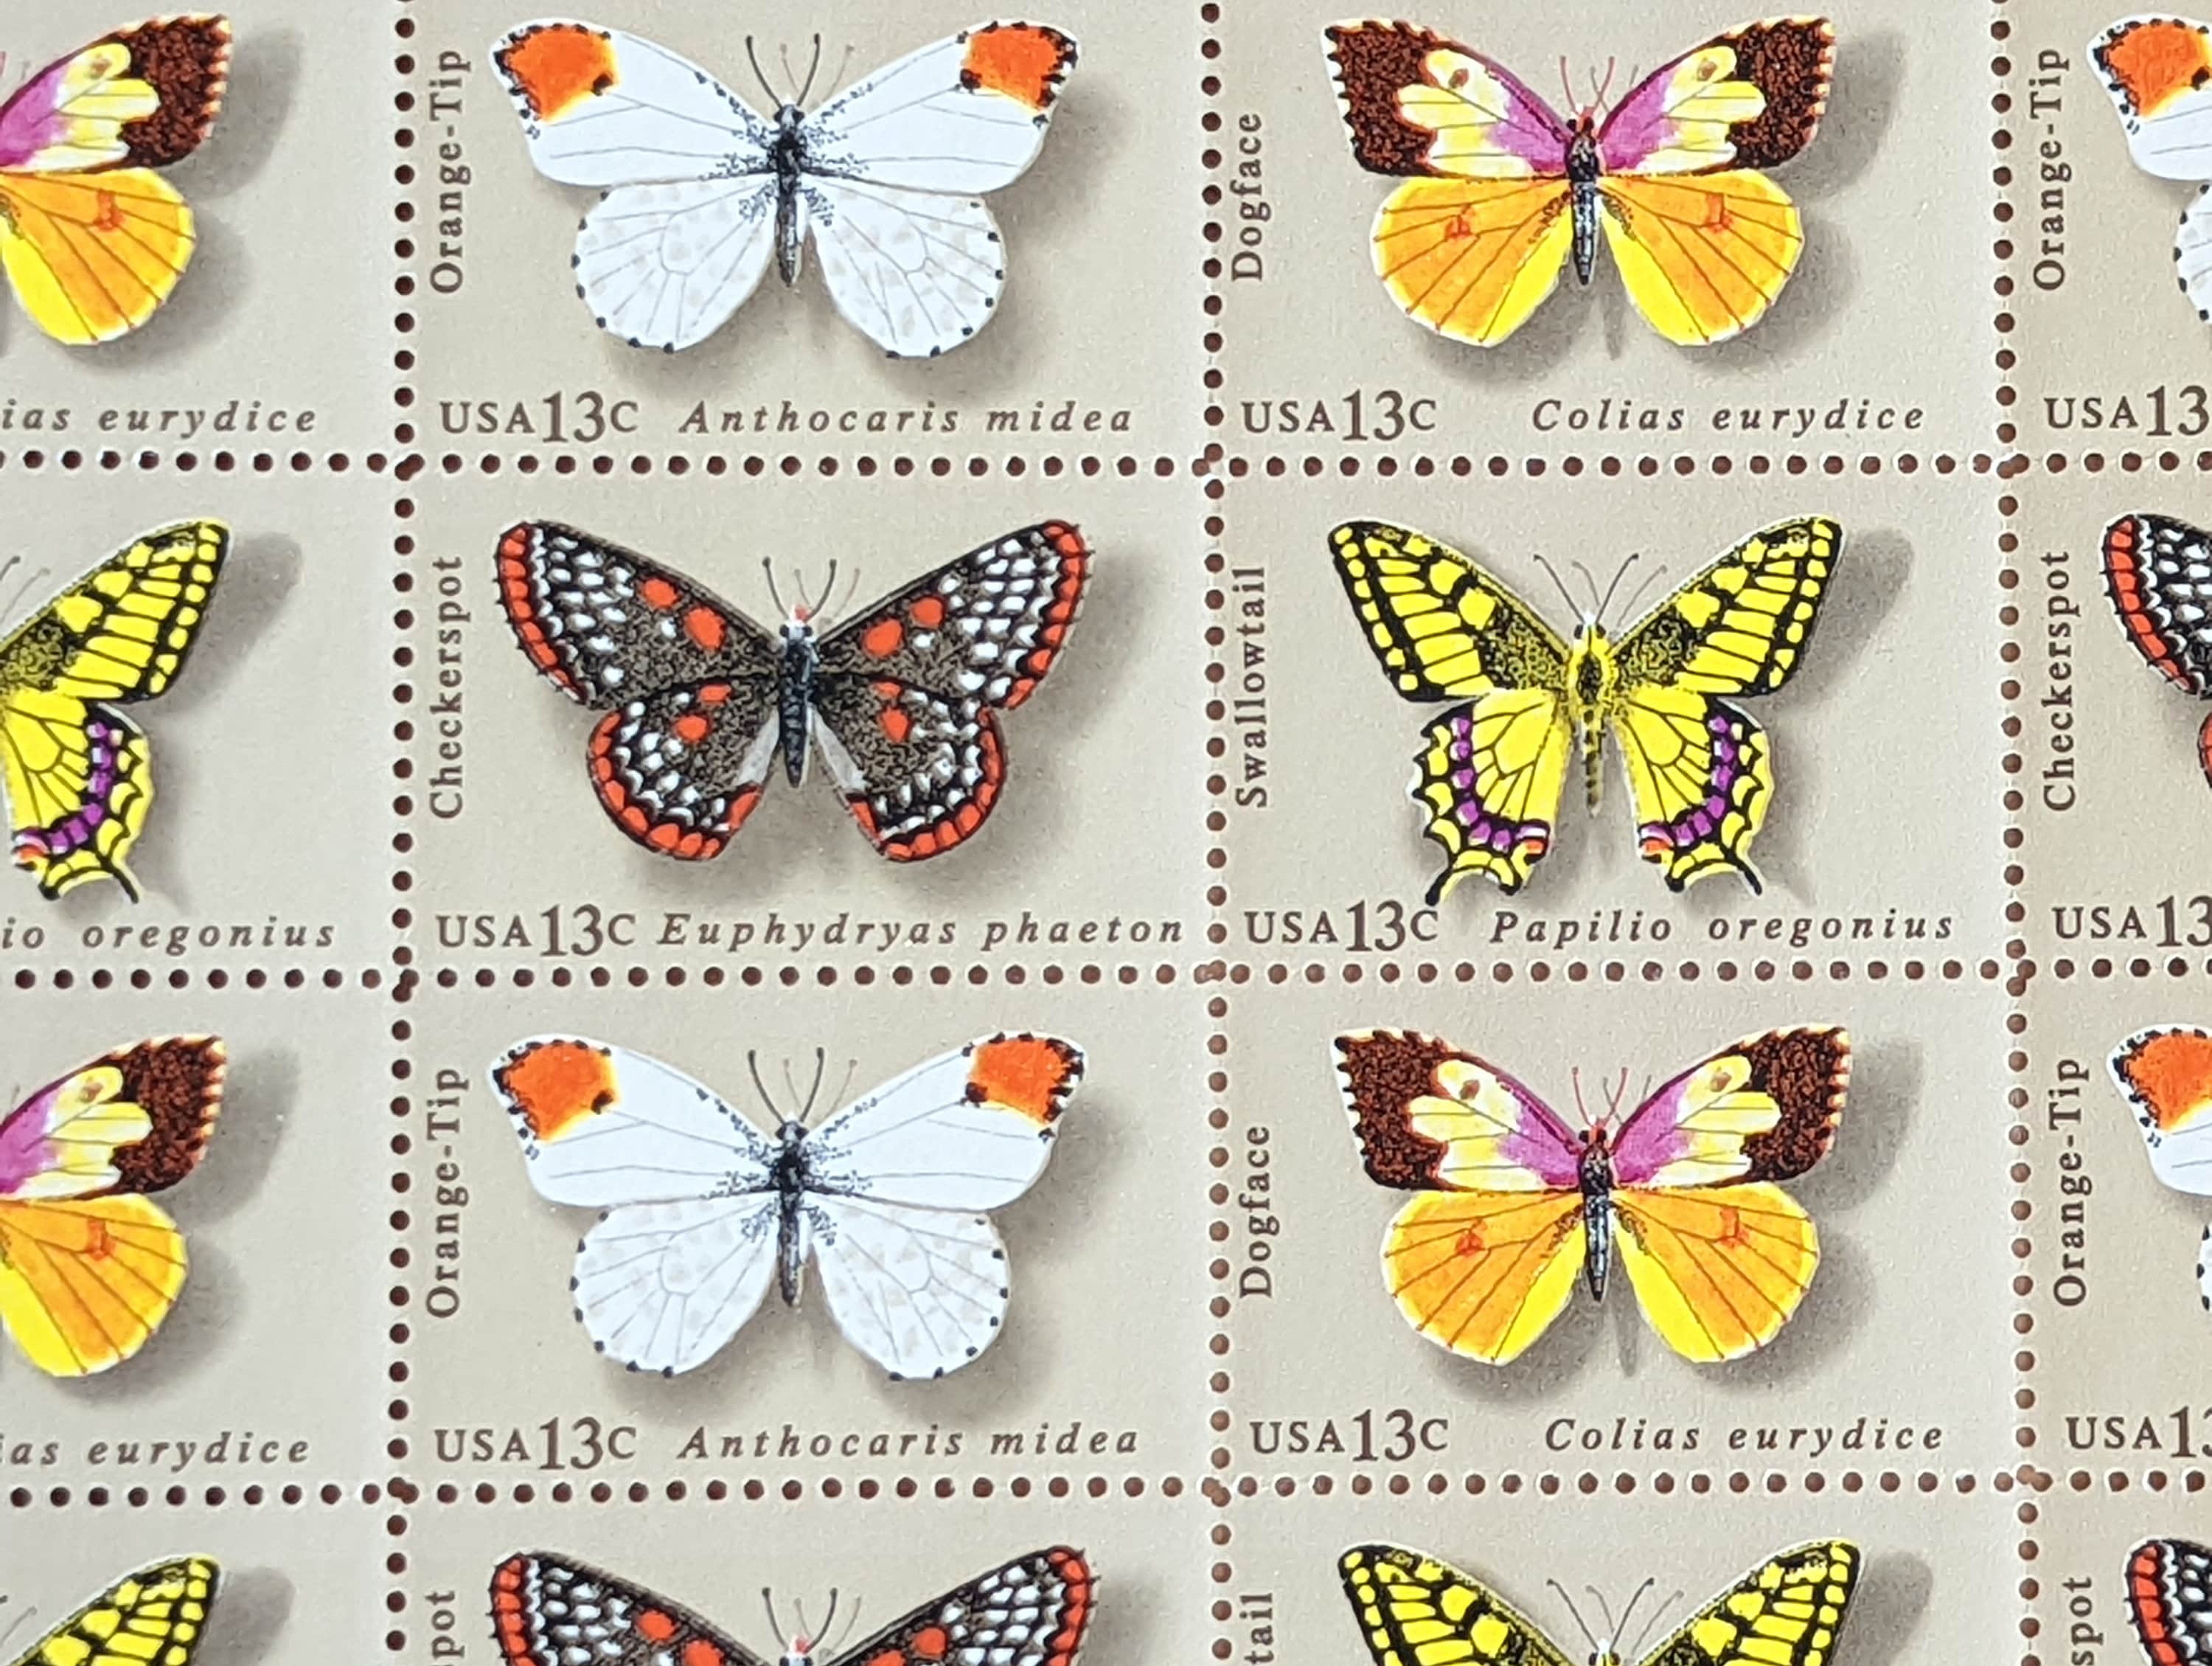 1714 - 1977 13c Butterflies: Dogface - Mystic Stamp Company